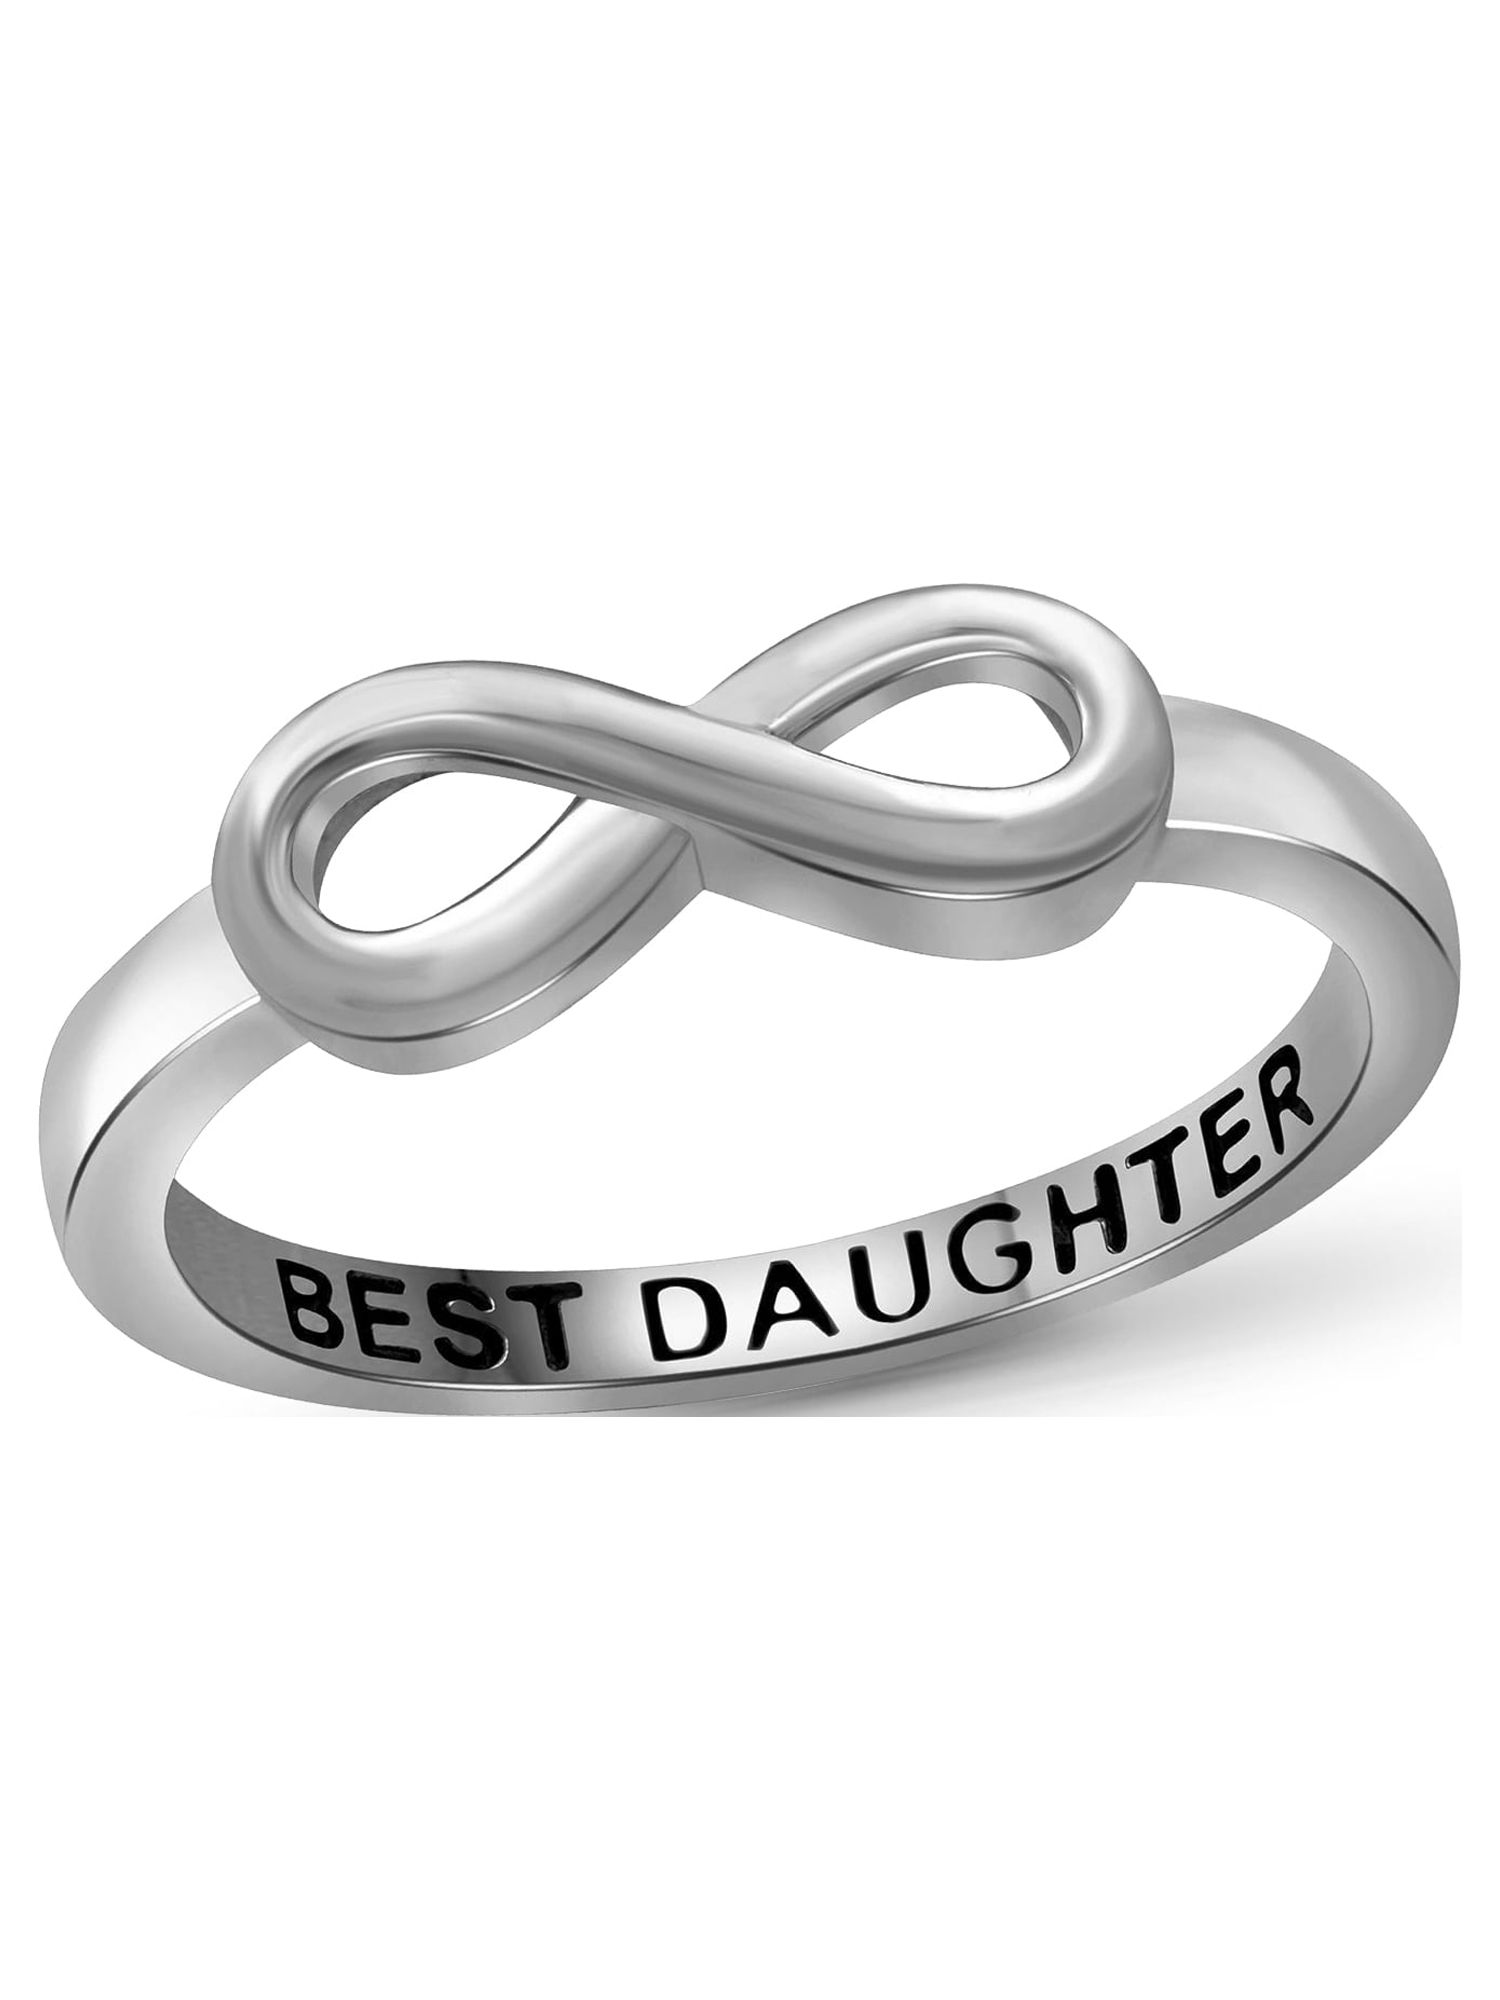 JewelersClub 0.925 Sterling Silver Infinity Friendship Ring for Women | Personalized Best Daughter Eternity Knot Symbol Band - image 1 of 5